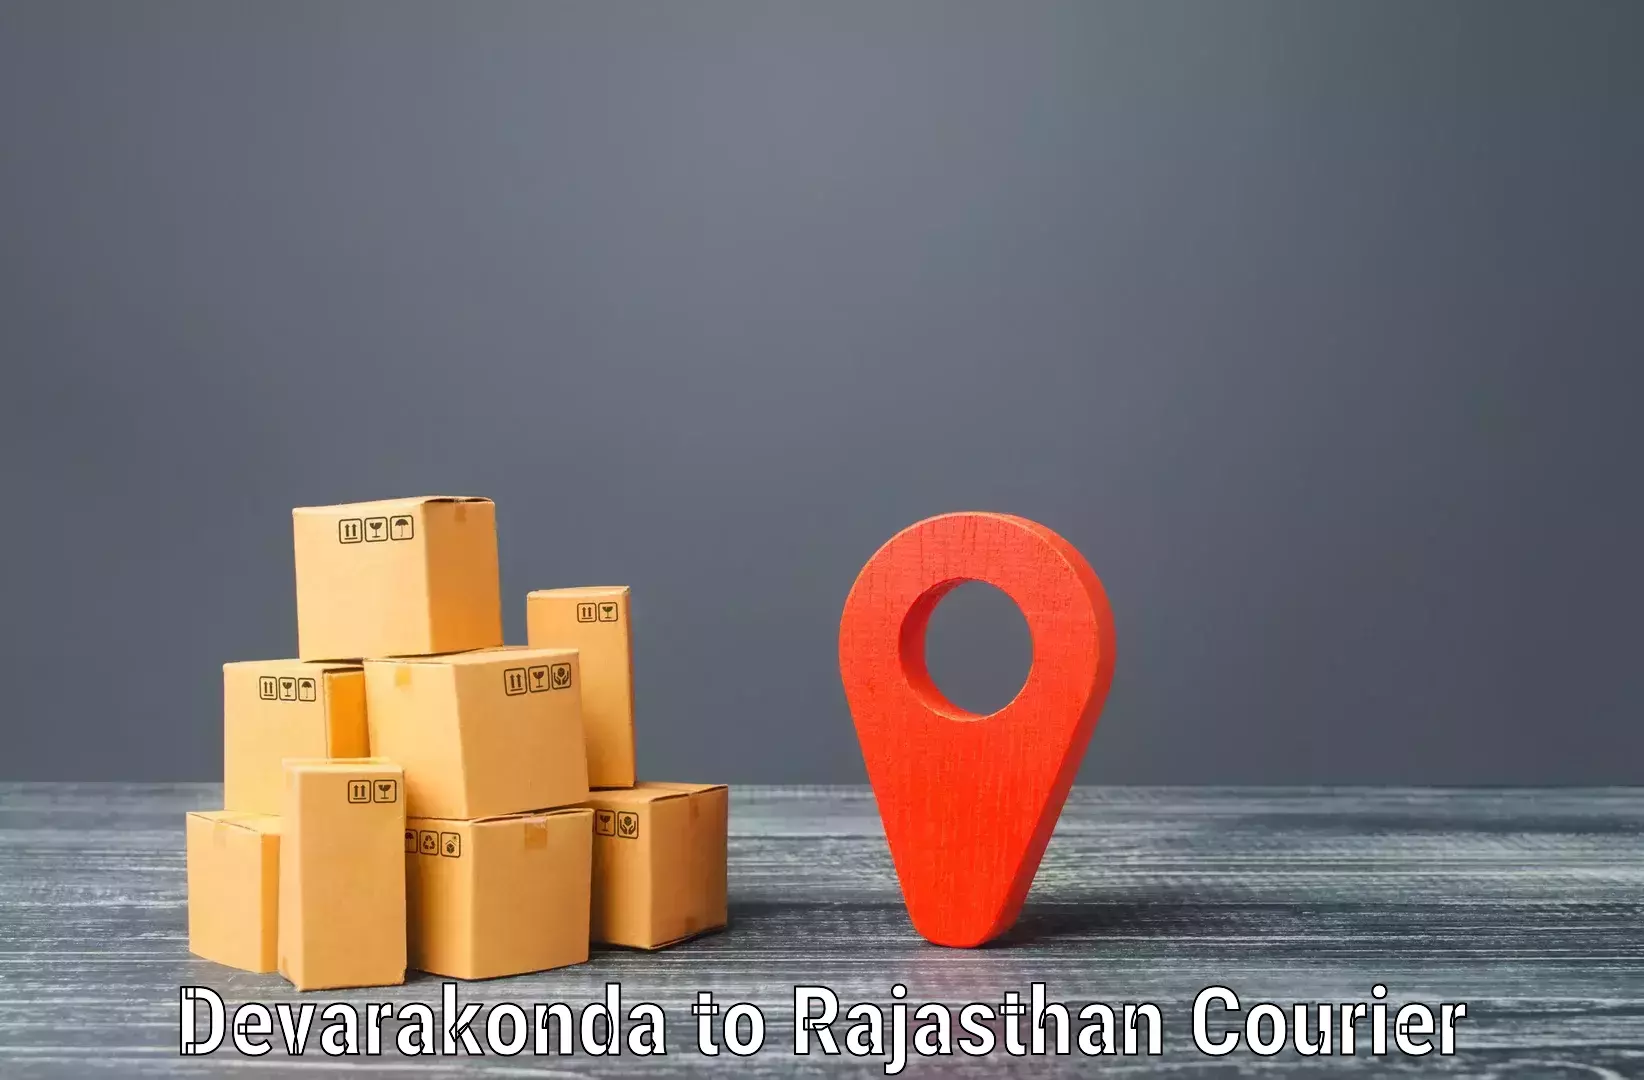 Parcel delivery automation Devarakonda to Yeswanthapur